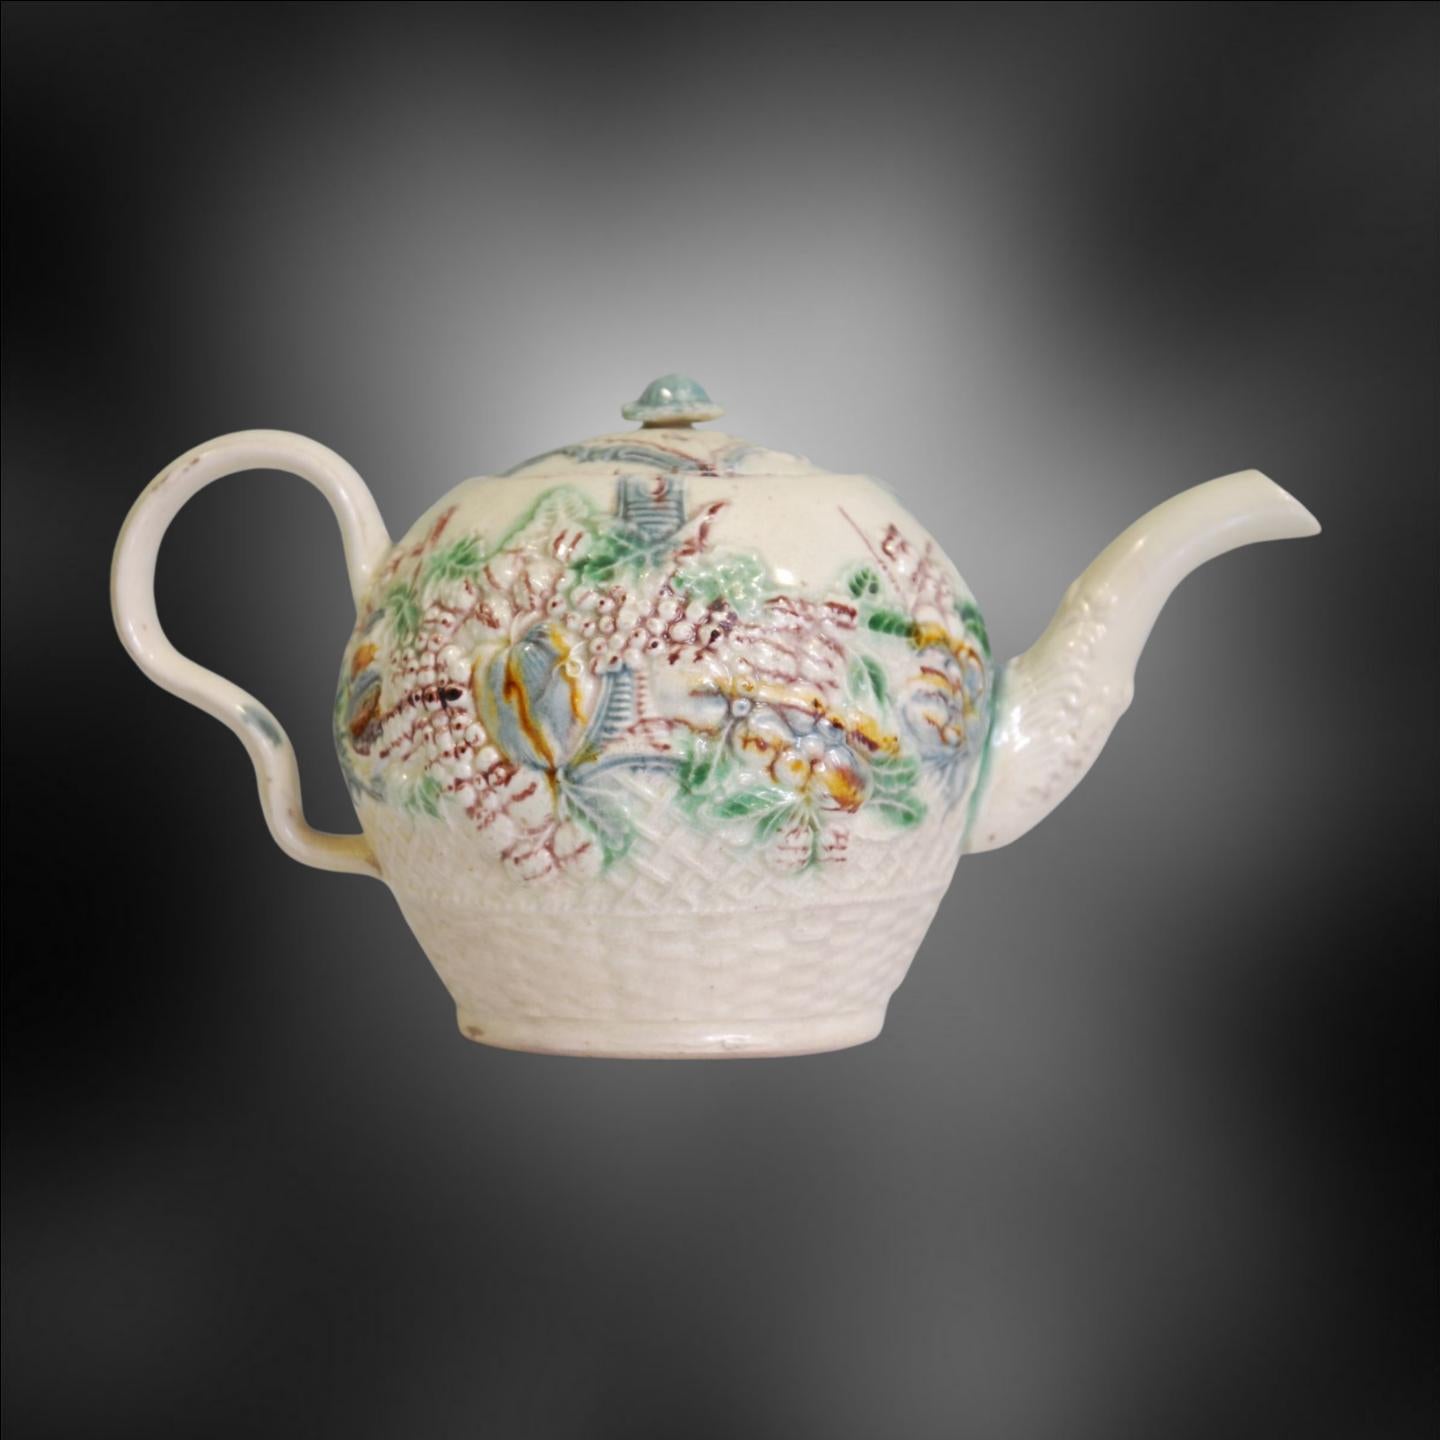 A classic Greatbatch teapot, with ear-shaped handle, in the form of a fruit basket. The fruit basket was emblematic of hospitality, being full of rare, exotic items.

William Greatbatch was an English potter who lived from 1735 to 1813. He was